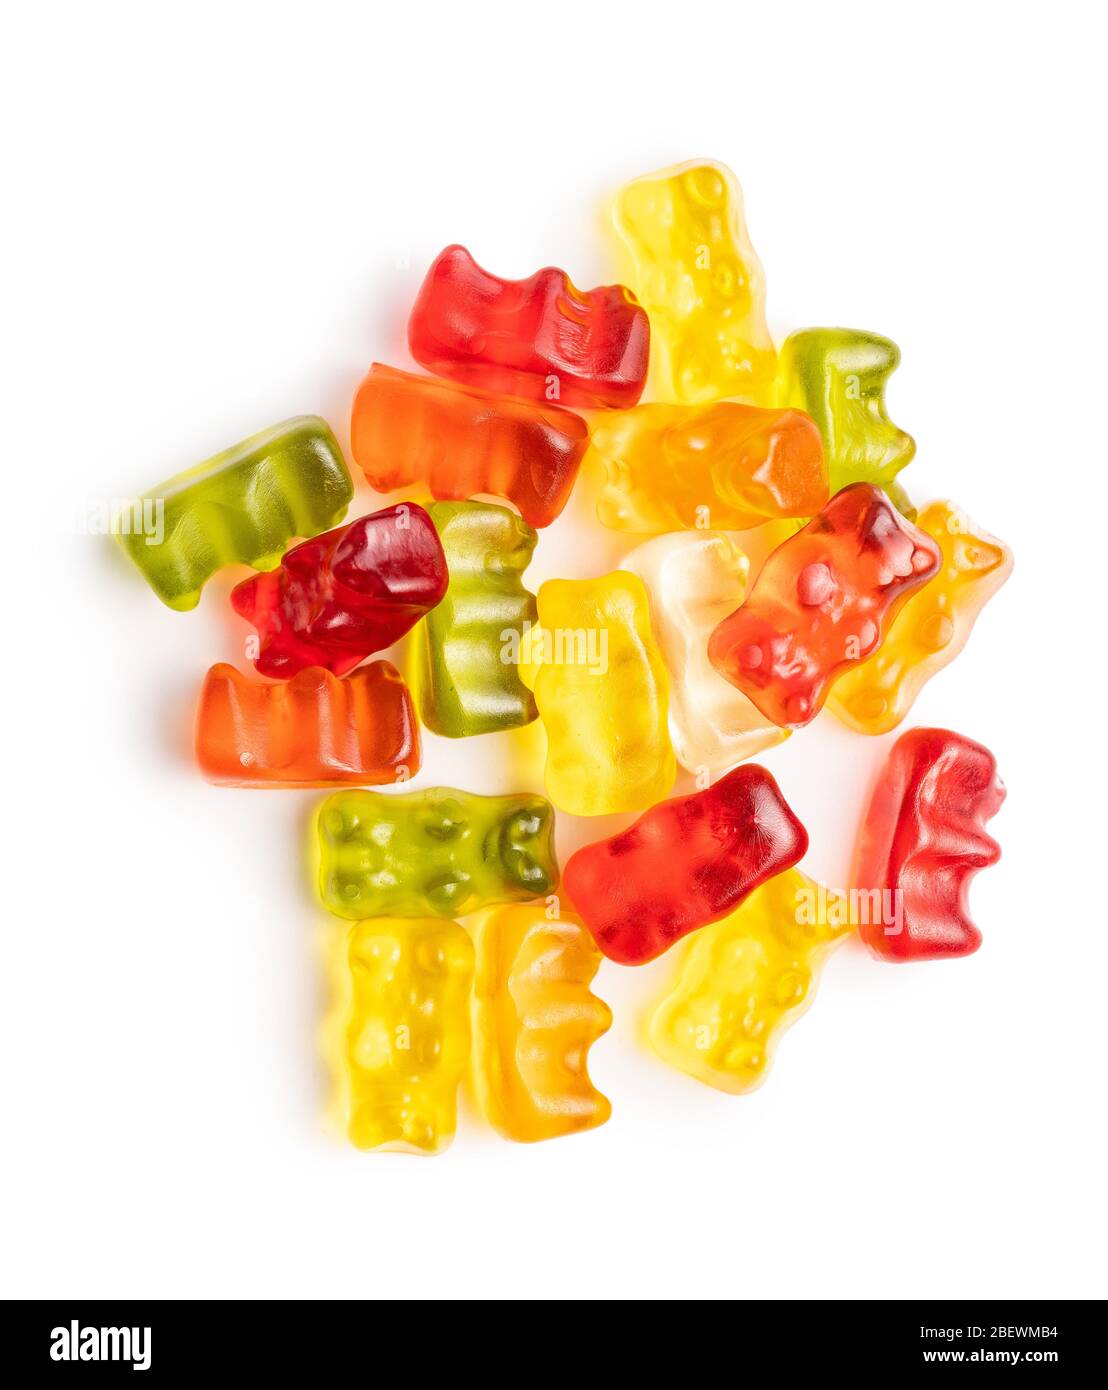 Gummy bears, jelly candy. Colorful bonbons isolated on white background. Stock Photo